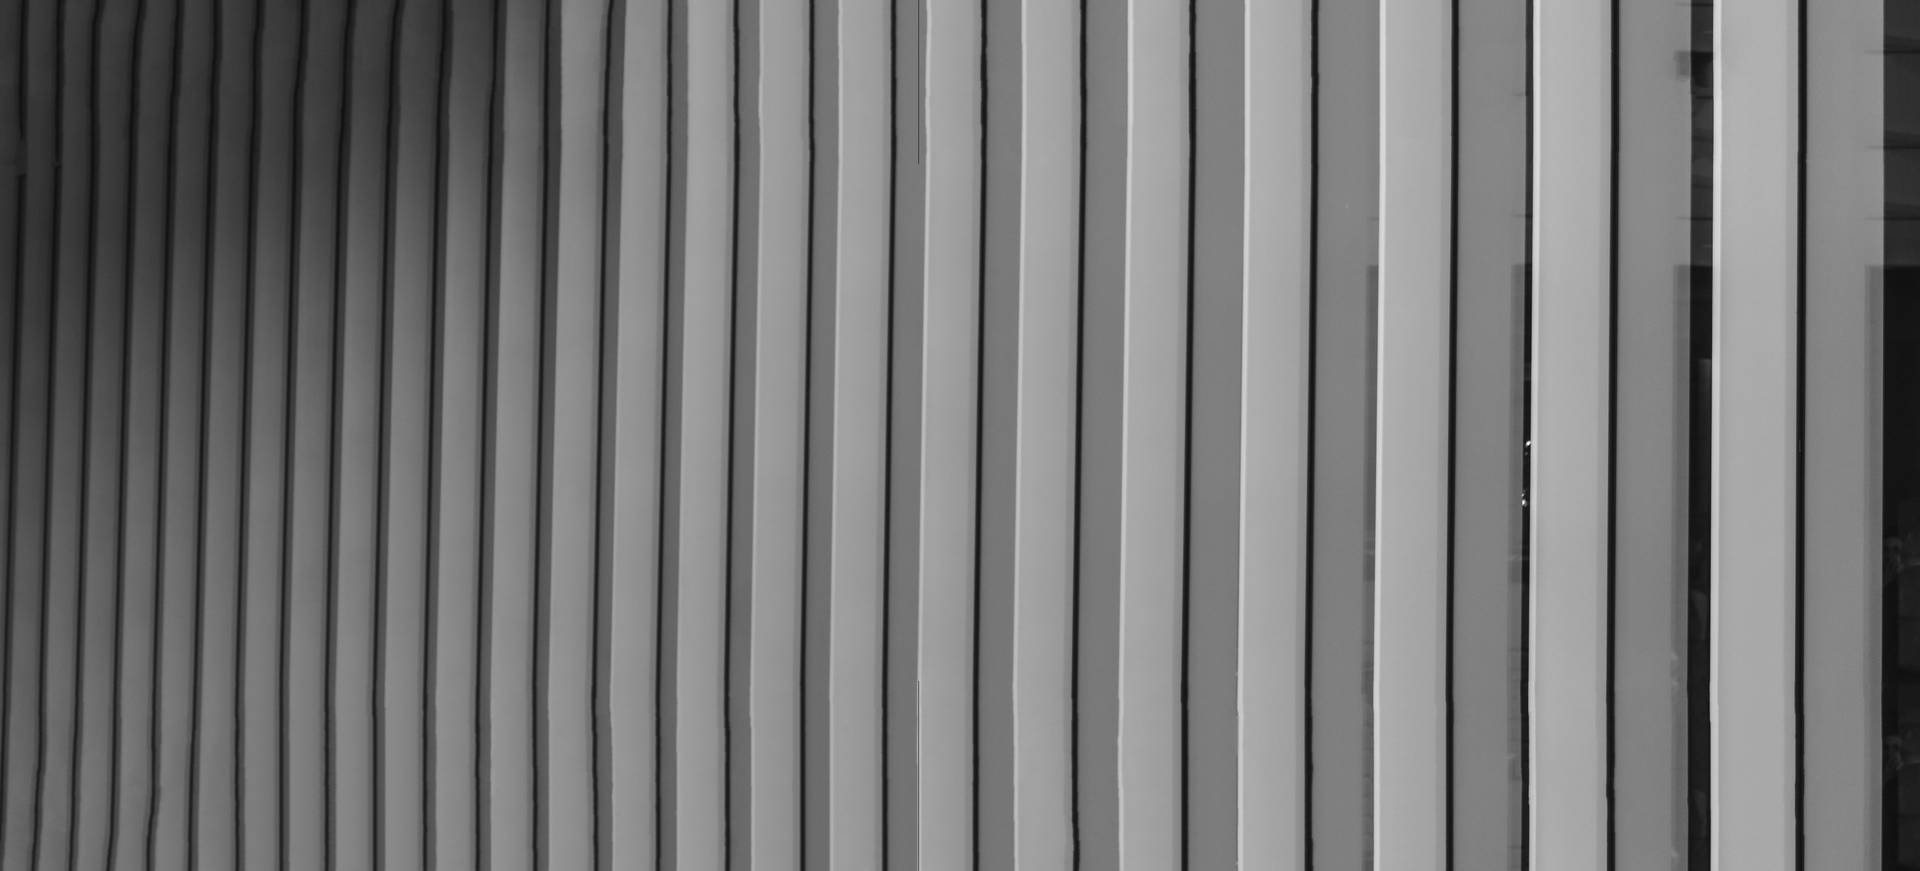 Gray 8688X3943 Wallpaper and Background Image